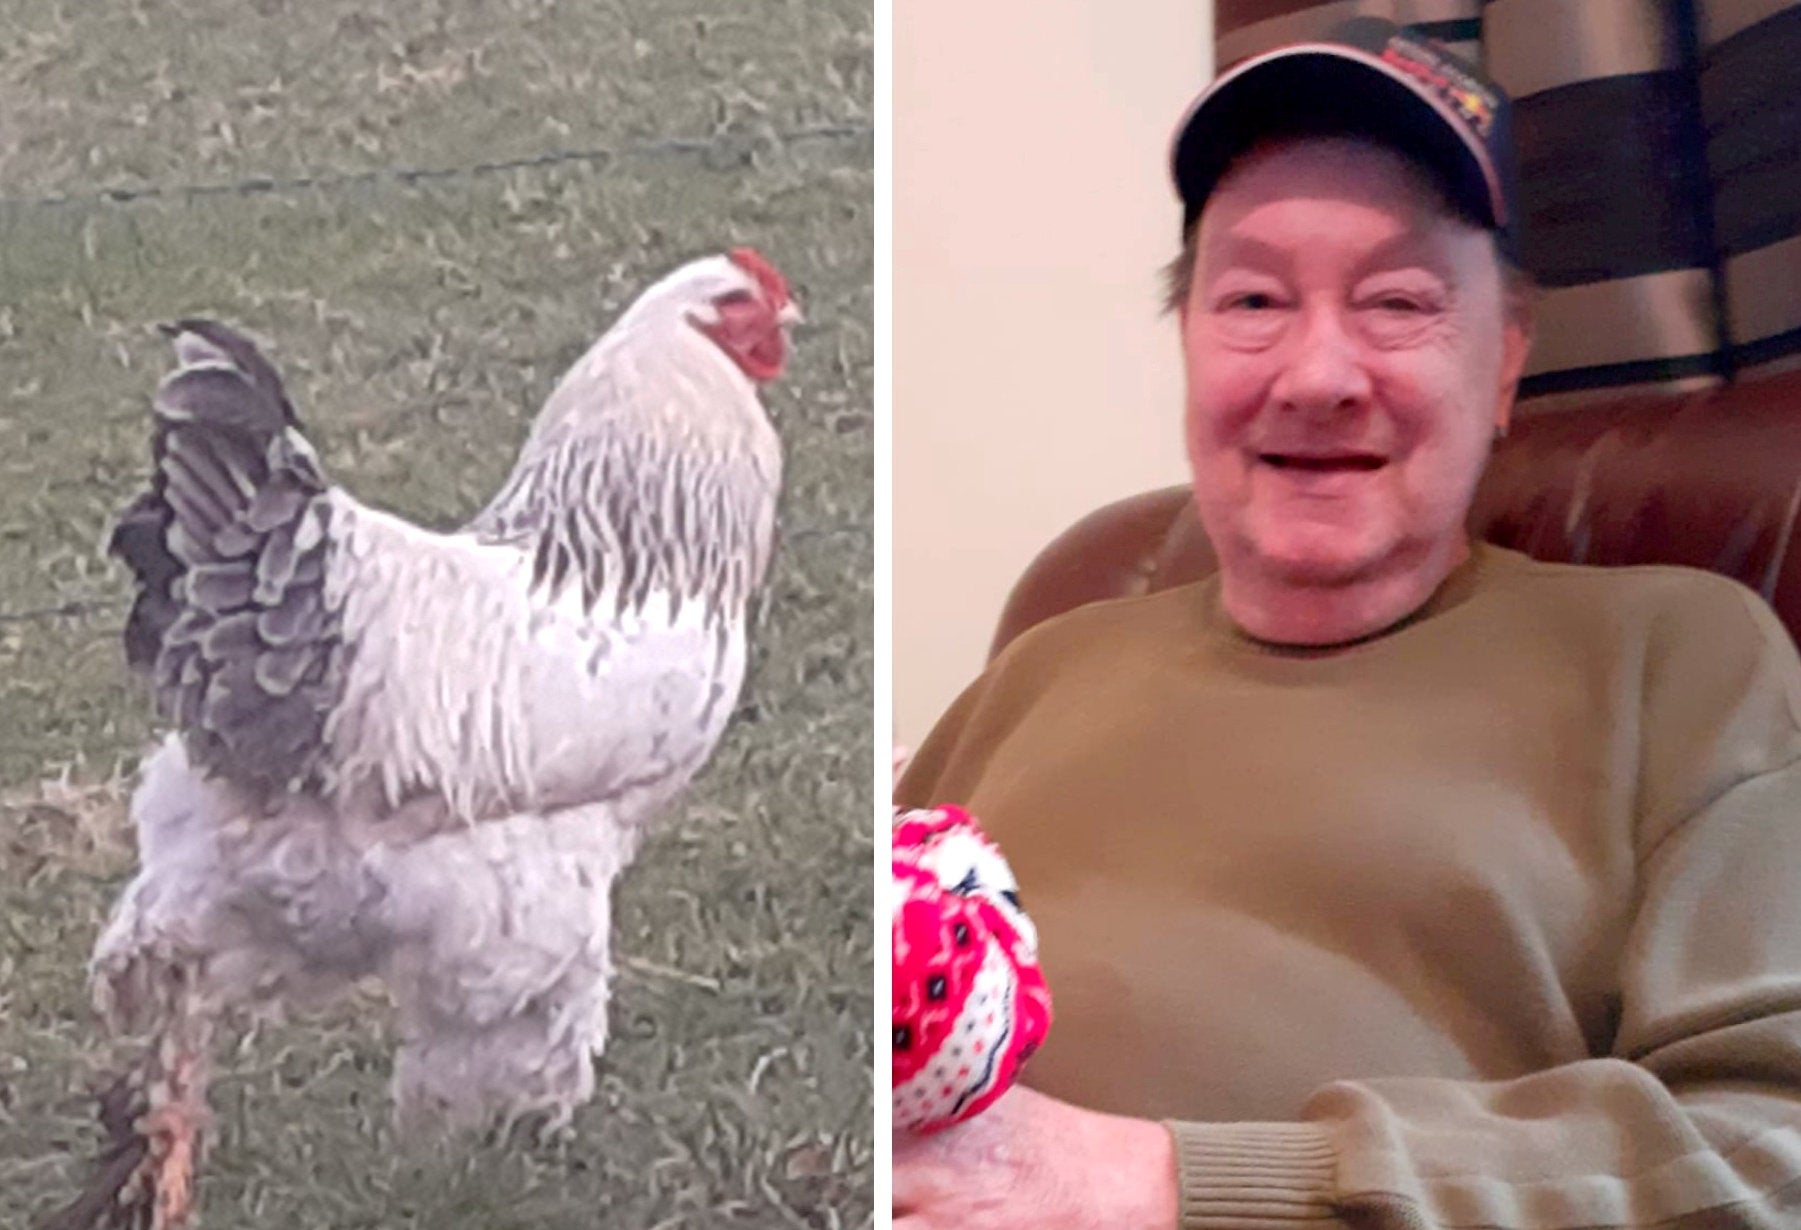 Jasper Kraus died after being attacked by his pet rooster